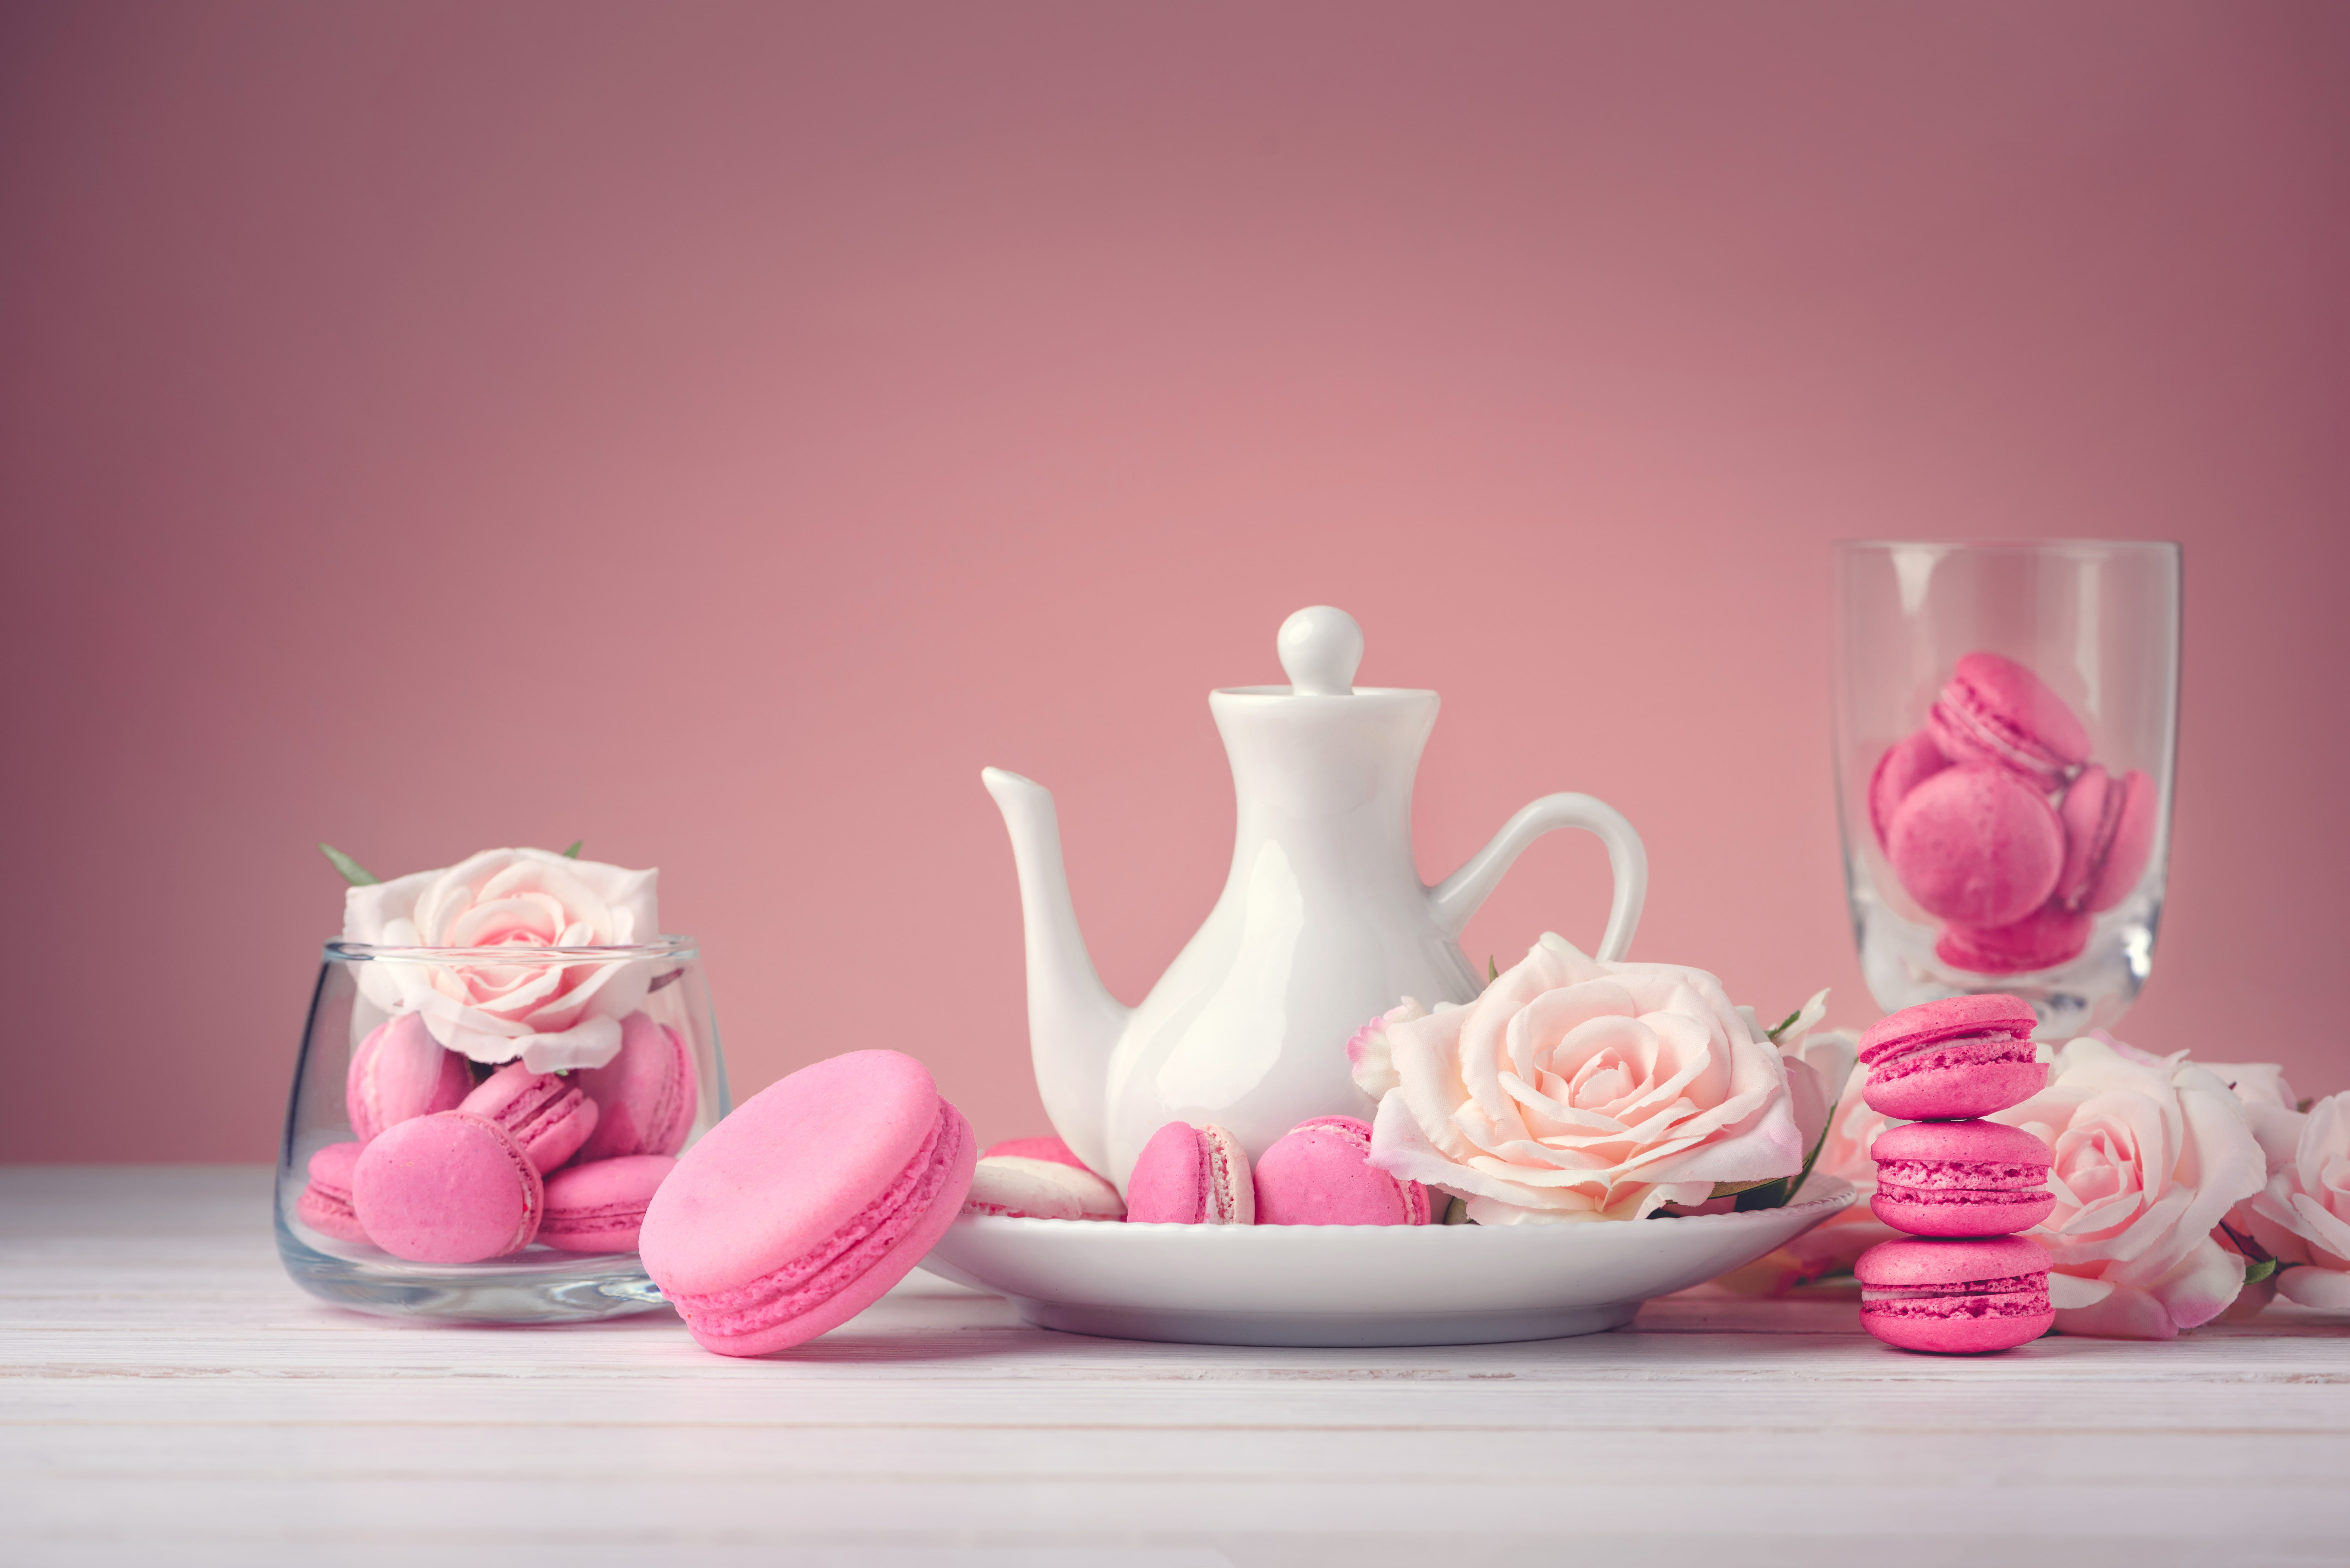 flowers, roses, dessert, pink, cakes, sweet, macaroon, french